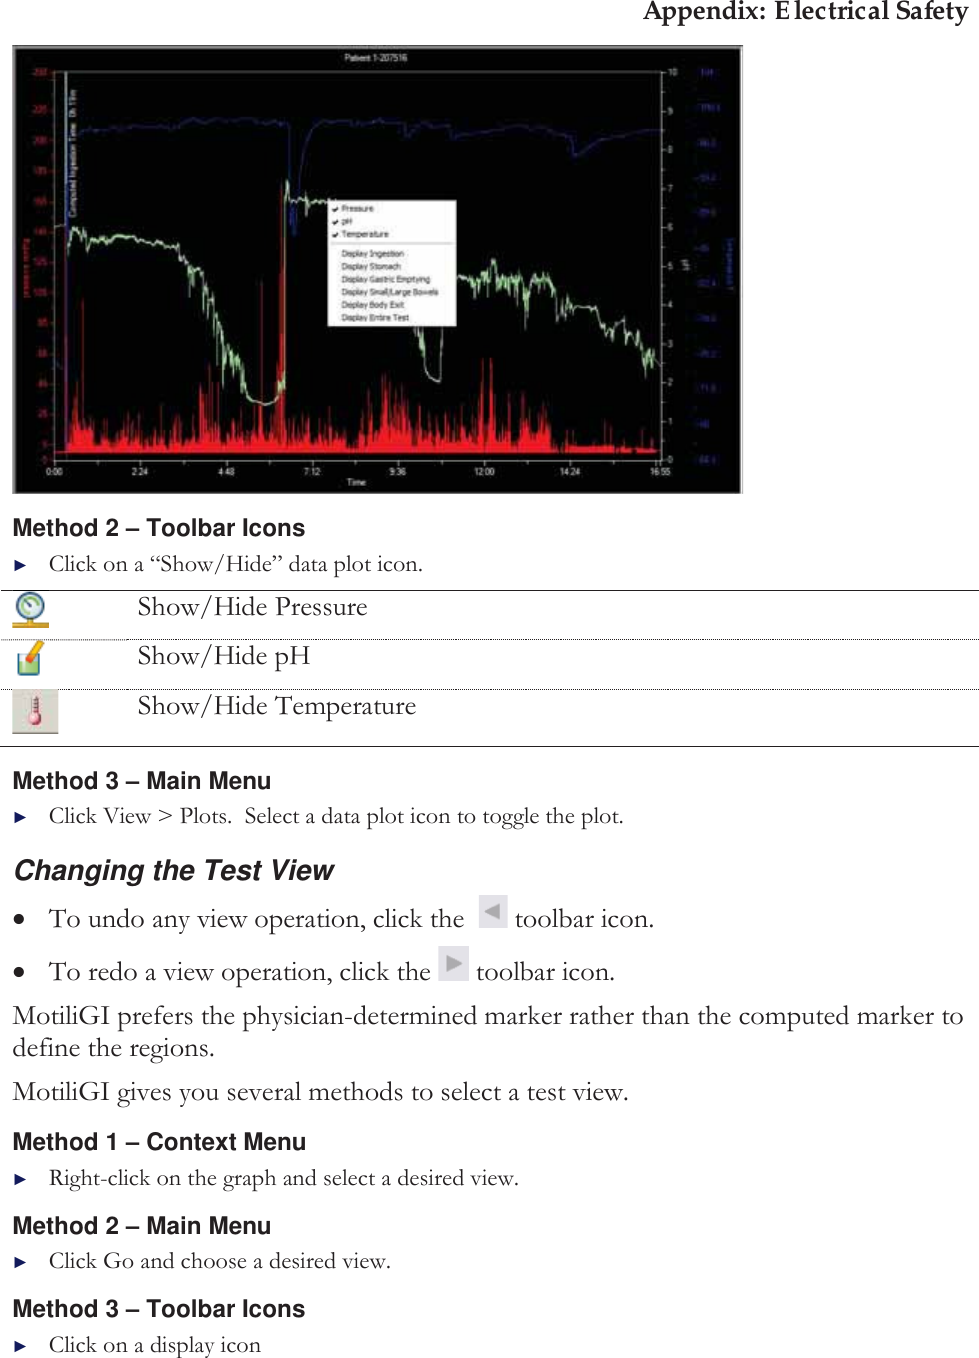 Appendix: Electrical Safety  Method 2 ± Toolbar Icons ►Click on a “Show/Hide” data plot icon.  Show/Hide Pressure  Show/Hide pH  Show/Hide Temperature Method 3 ± Main Menu ►Click View &gt; Plots.  Select a data plot icon to toggle the plot. Changing the Test View xTo undo any view operation, click the    toolbar icon. xTo redo a view operation, click the   toolbar icon. MotiliGI prefers the physician-determined marker rather than the computed marker to define the regions. MotiliGI gives you several methods to select a test view. Method 1 ± Context Menu►Right-click on the graph and select a desired view. Method 2 ± Main Menu ►Click Go and choose a desired view. Method 3 ± Toolbar Icons ►Click on a display icon 